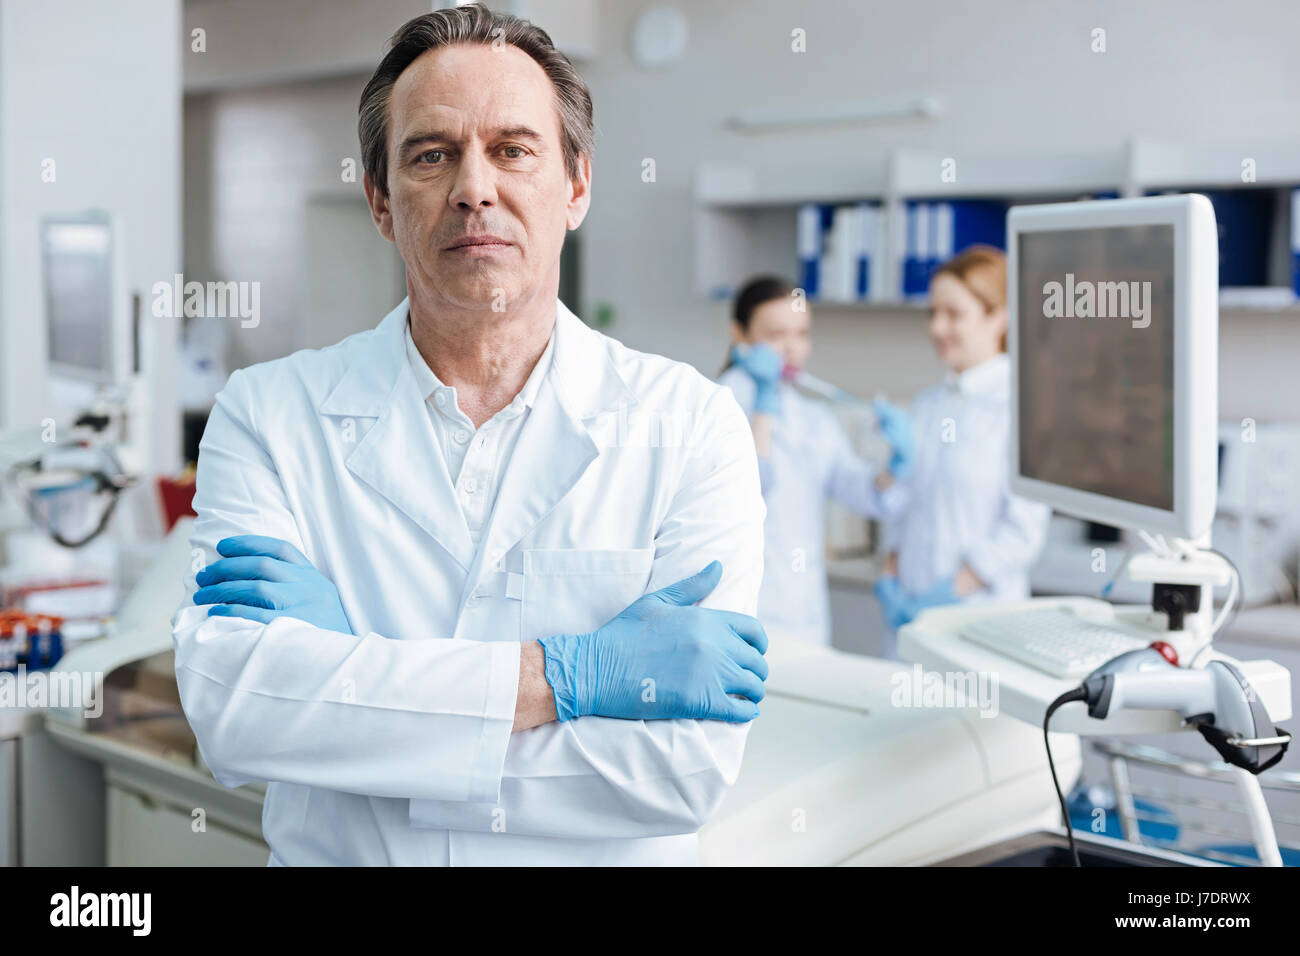 Serious male person crossing arms on chest Stock Photo